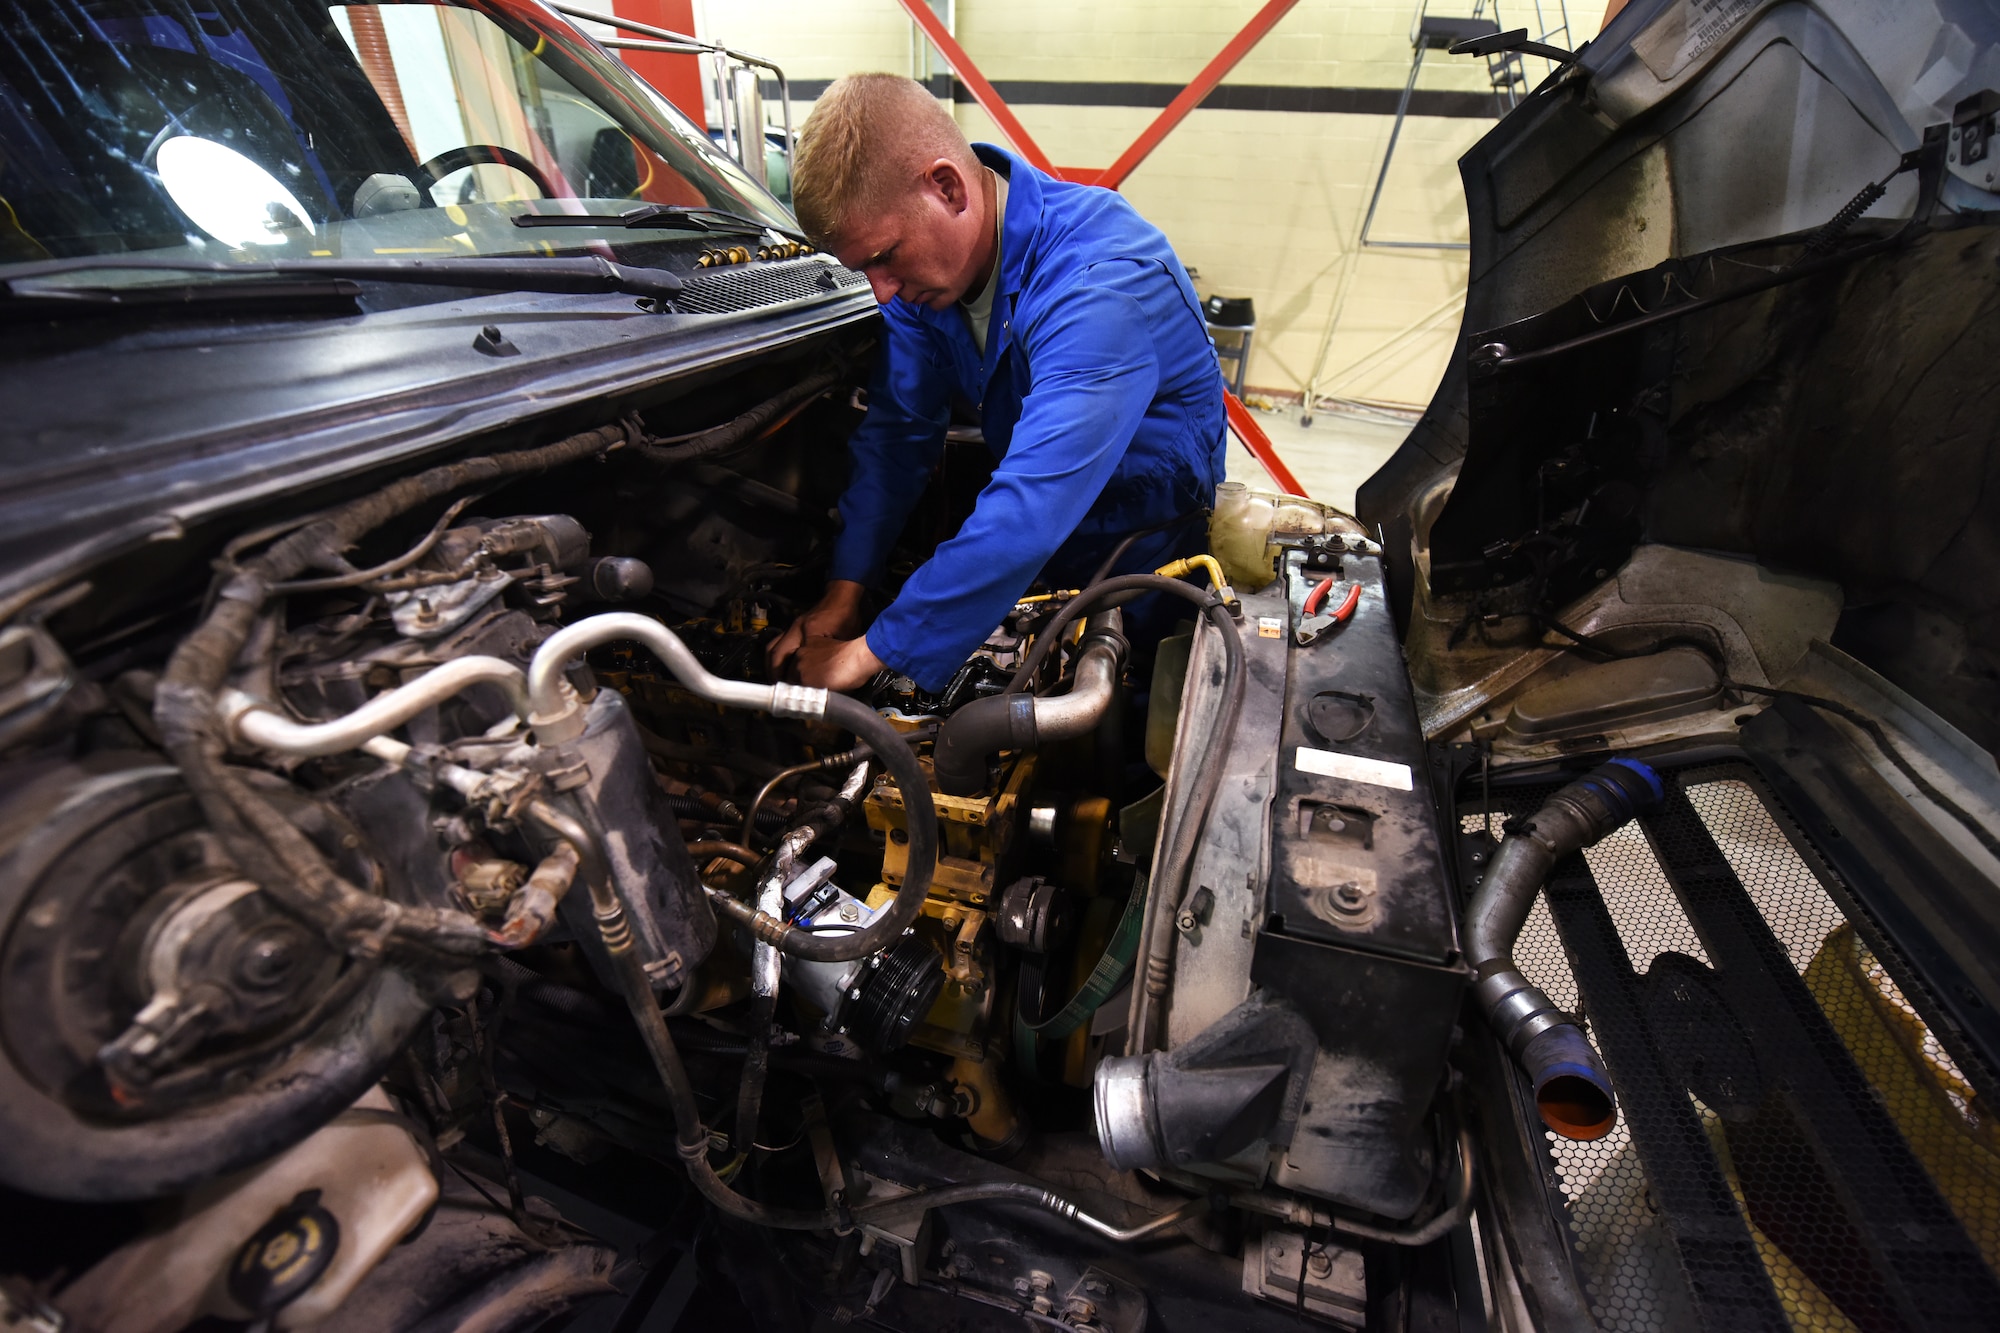 Senior Airman Jason Brown, 341st Logistics Readiness Squadron truck and tractor shop vehicle mechanic, works on a maintenance van engine July 27, 2015, at Malmstrom Air Force Base, Mont. The 341st LRS truck and tractor maintenance shop maintains all semi trucks and trailers on base. (U.S. Air Force photo/Chris Willis)